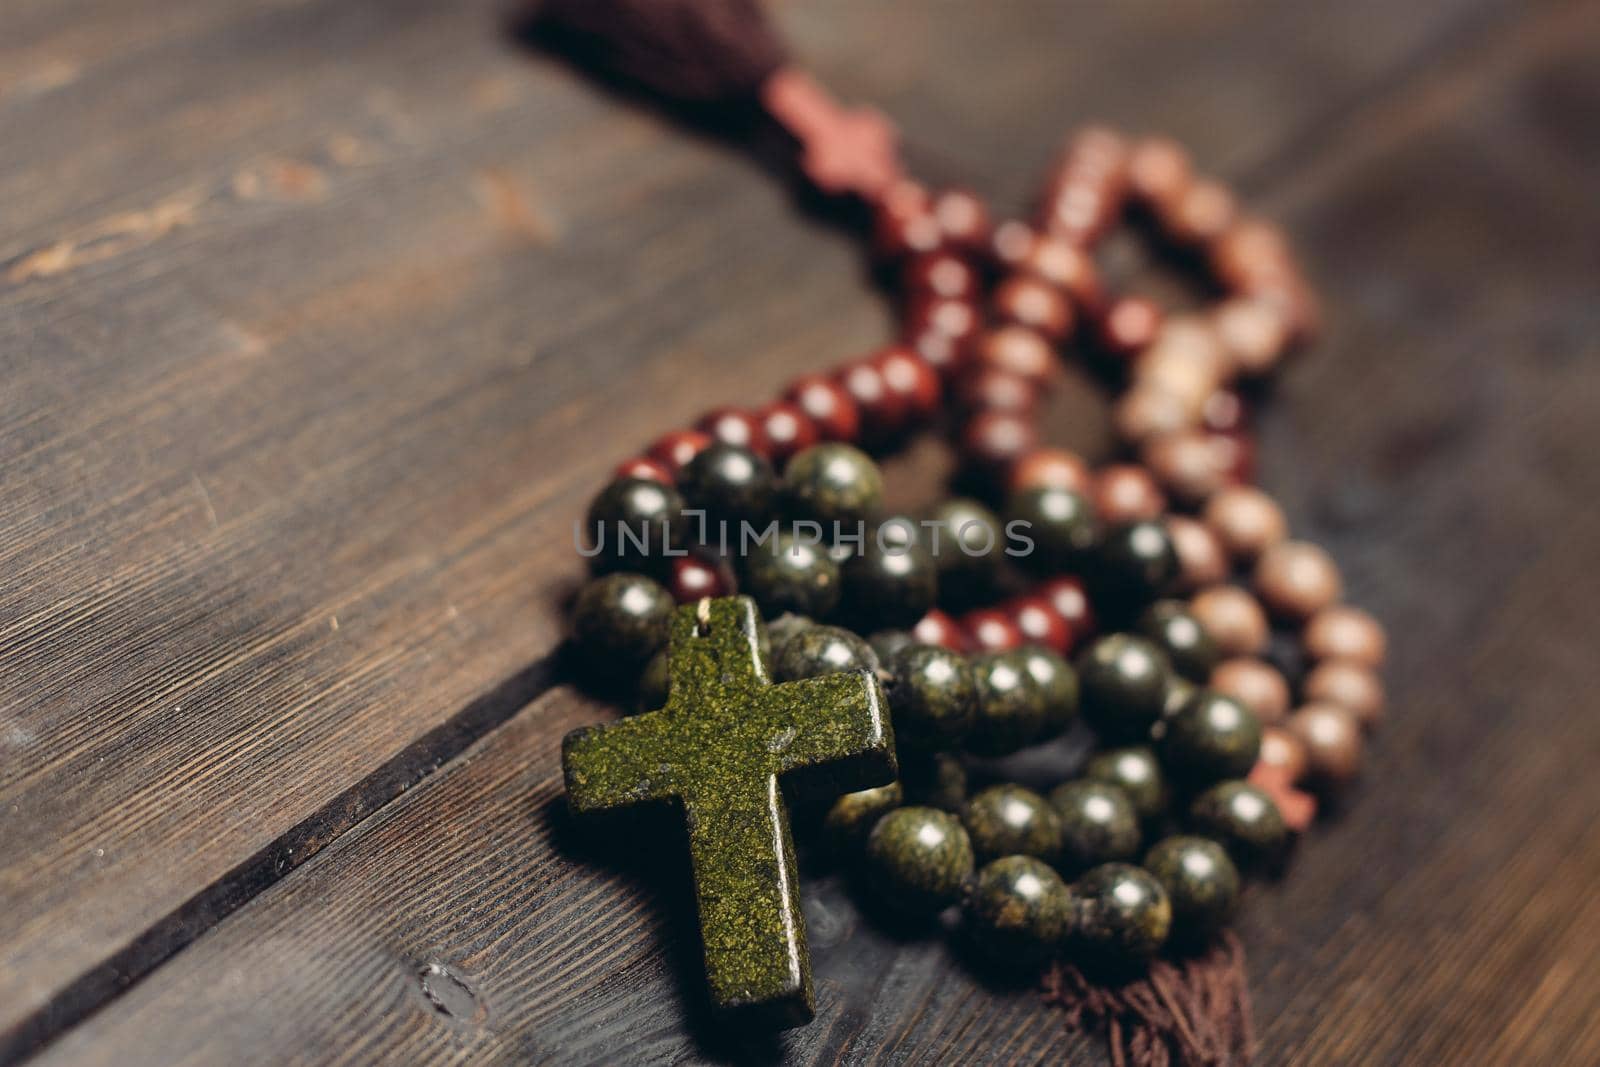 Orthodox cross with beads clear religion catholicism. High quality photo